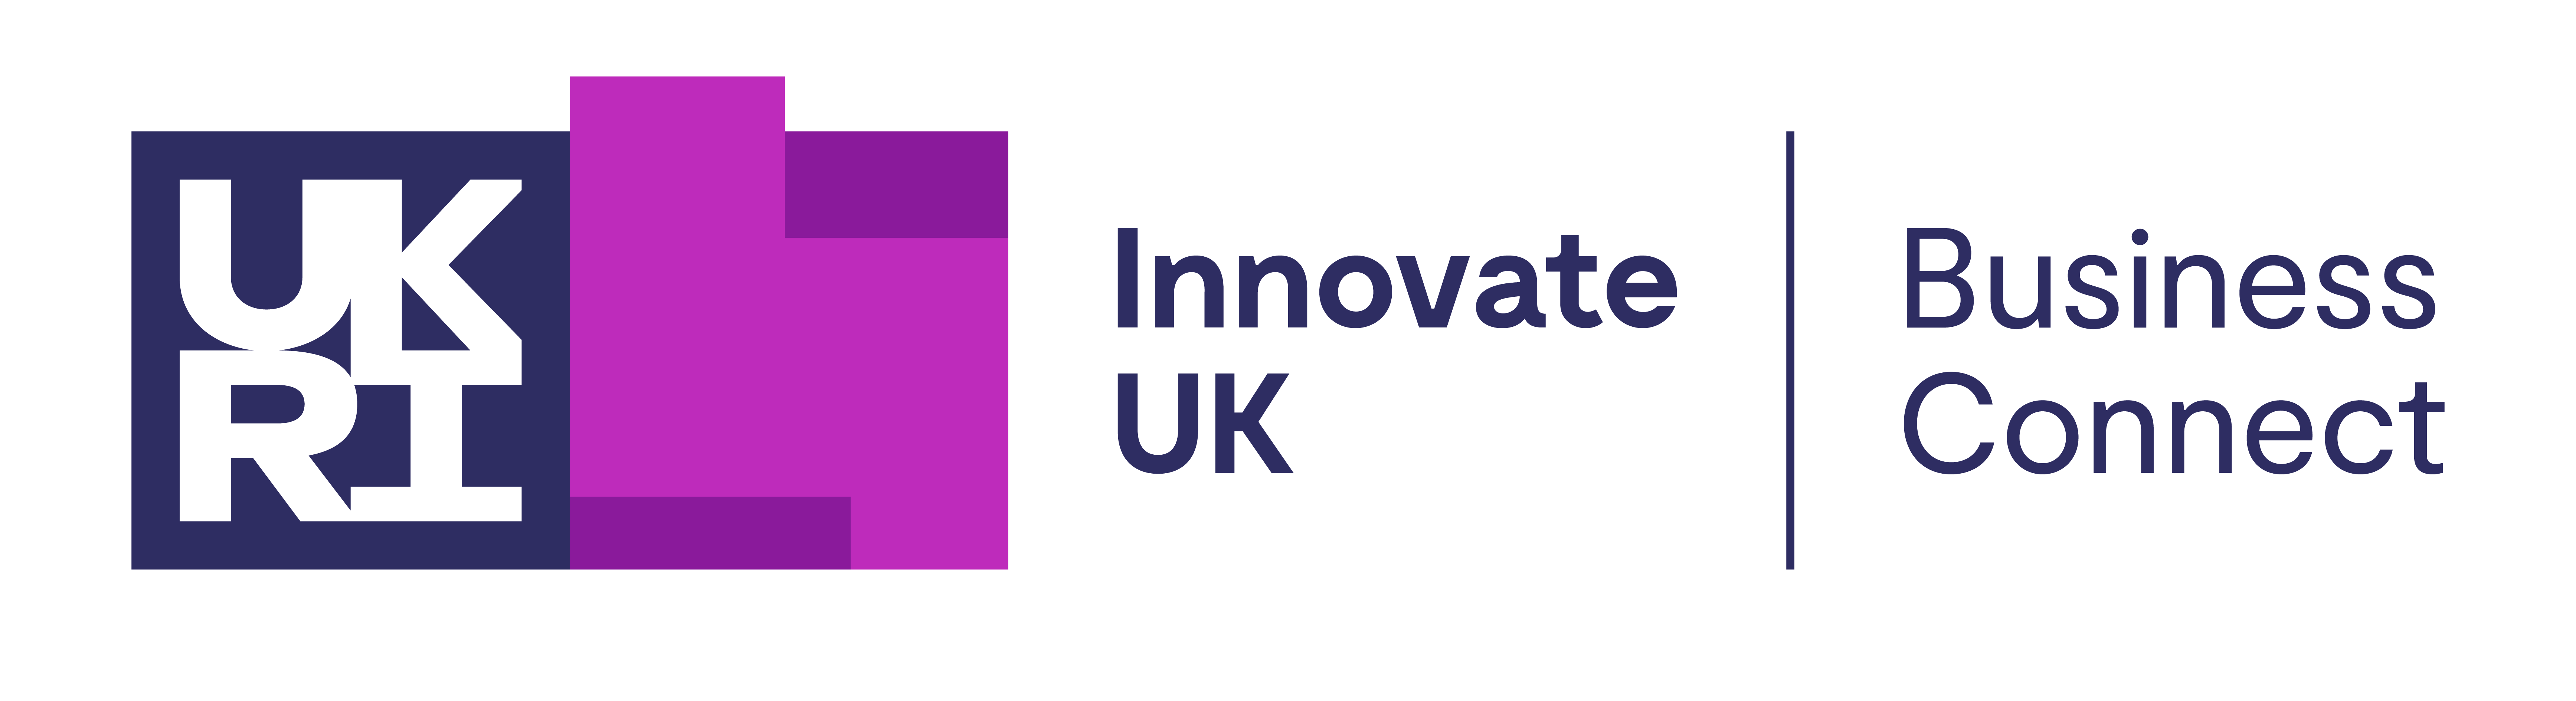 Innovate UK Business Connect